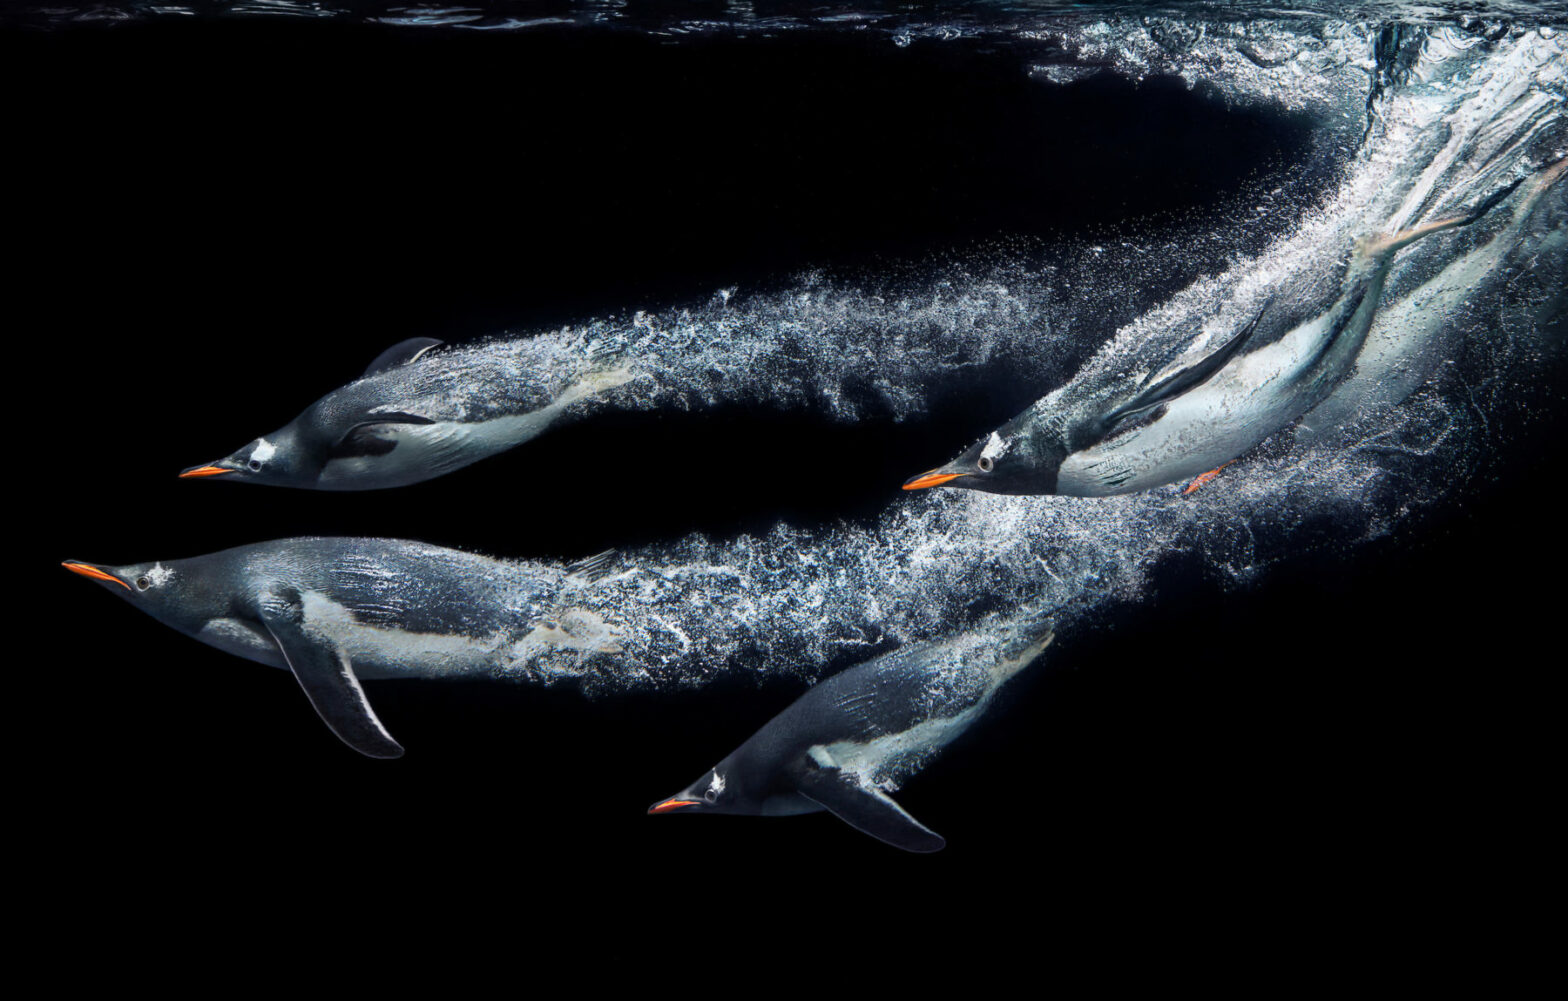 Vital Impacts: stunning photography inspires wonder and curiosity for our natural world